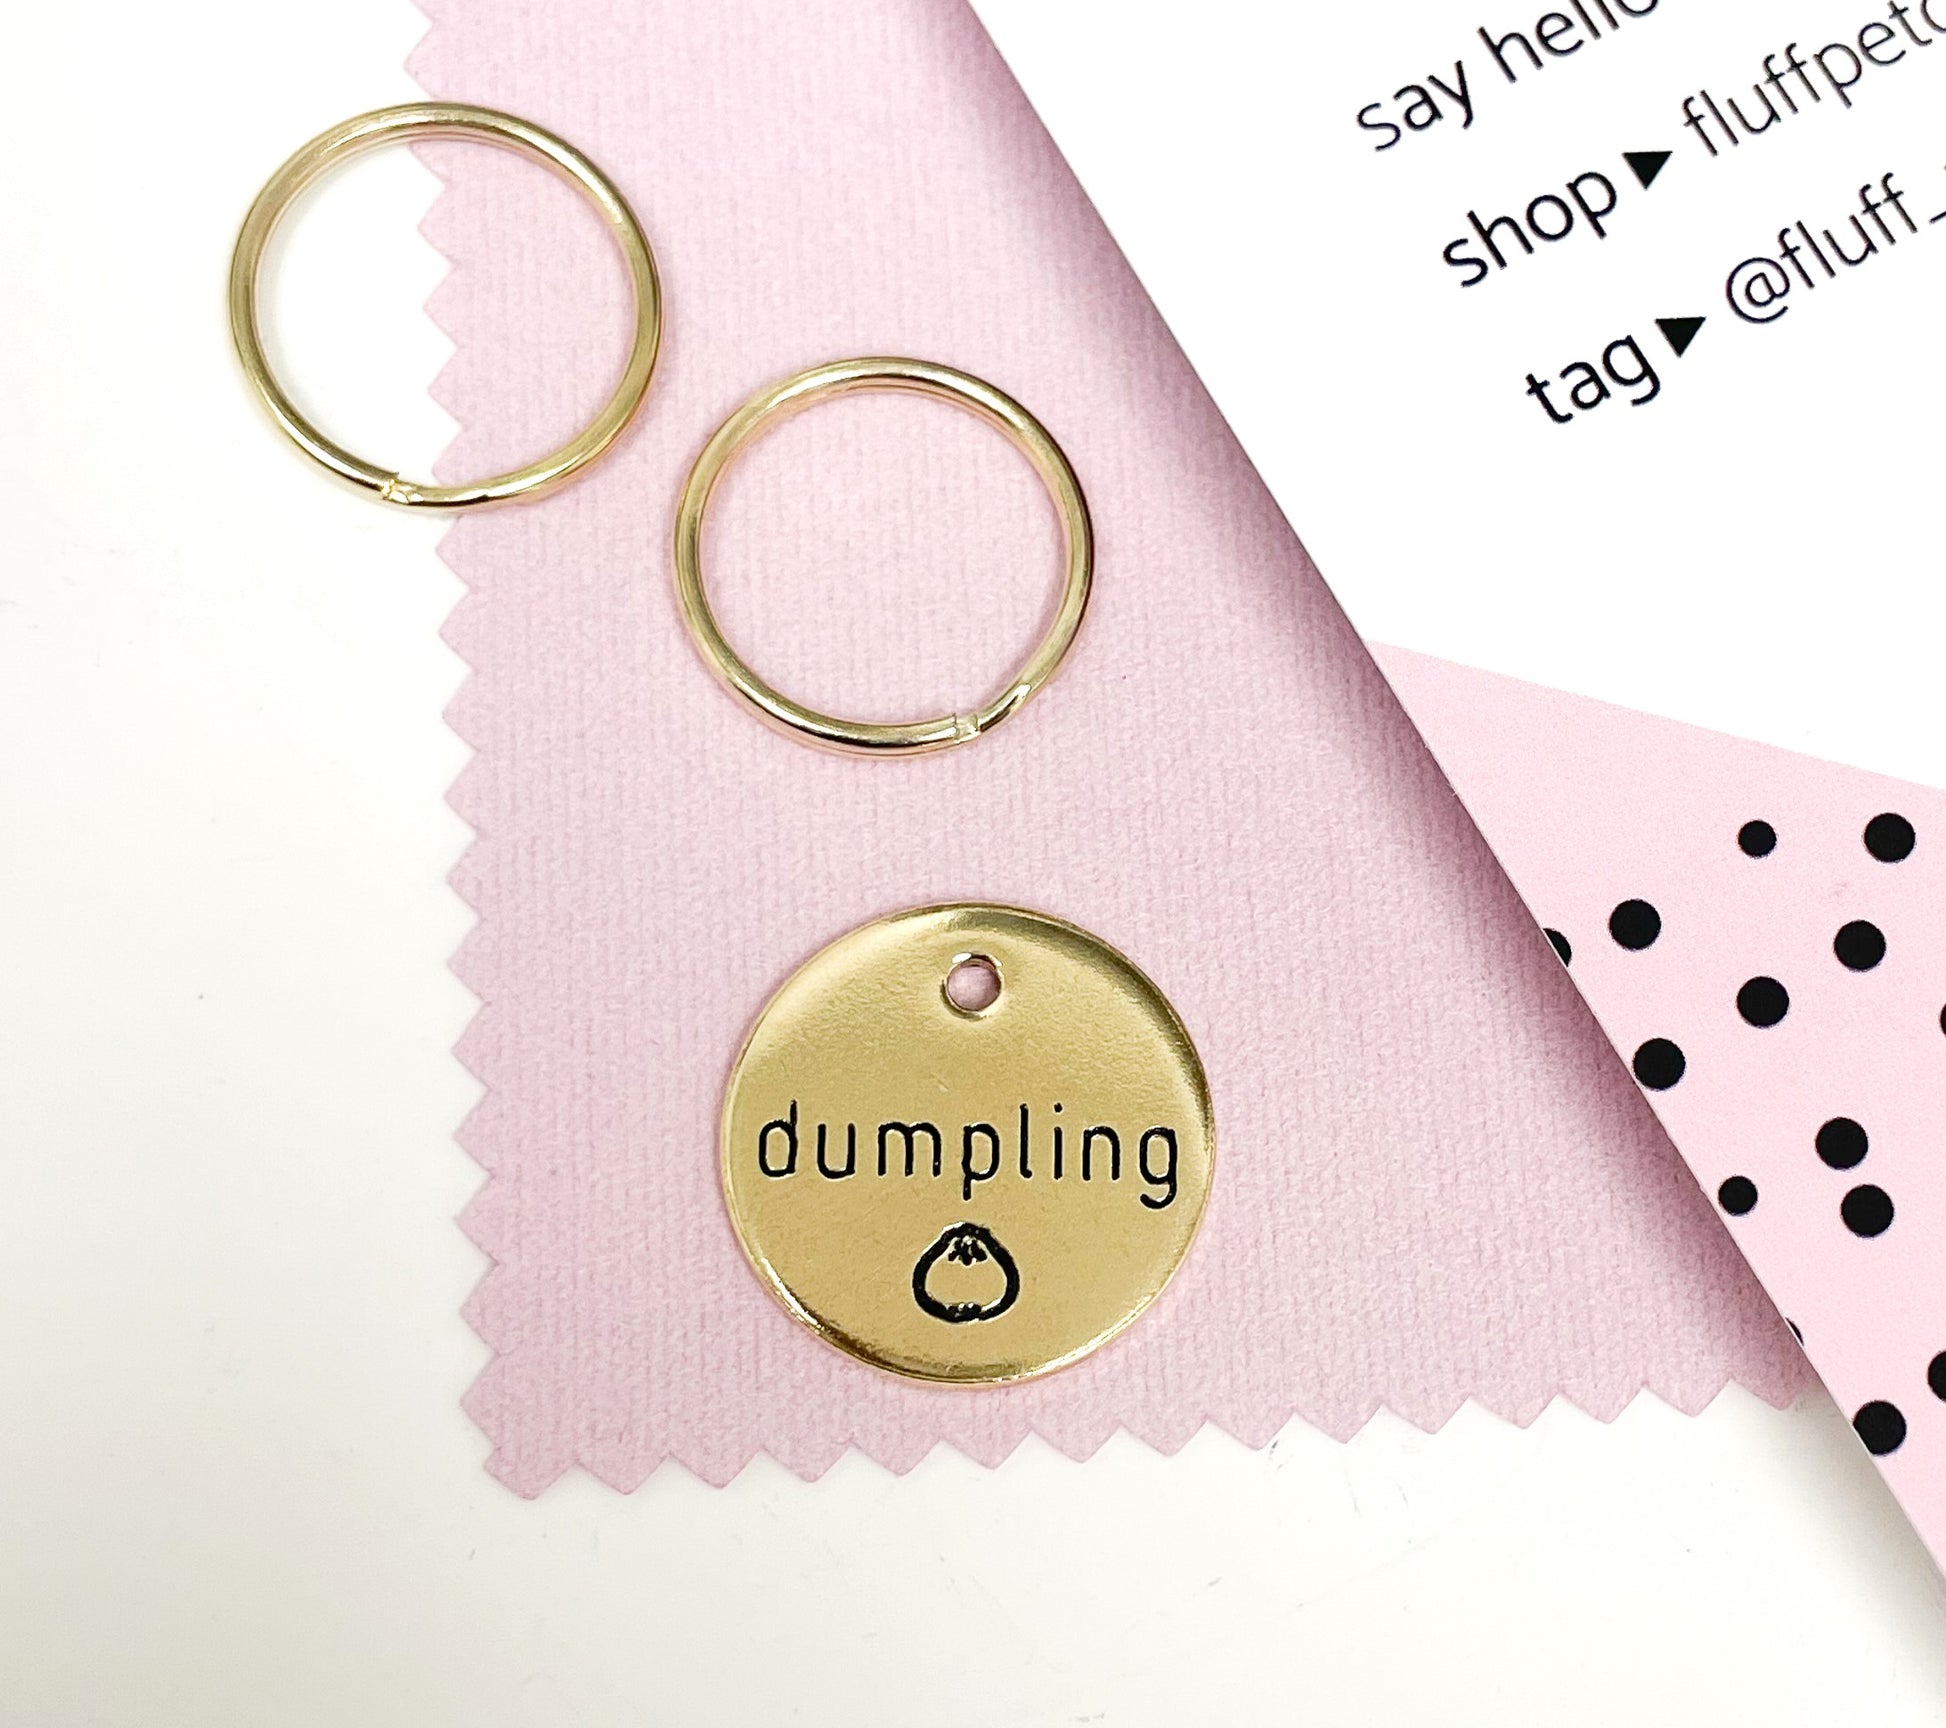 Personalized Dog Tag - Dumpling Design Engraved Dog Tag - Dumpling Design Tag - Cat ID Tag - Dog Collar Tag - Custom Dog Tag - Personalized Tag - Pet ID Tag - Pet Name Tag - Food Themed Dog Tag 